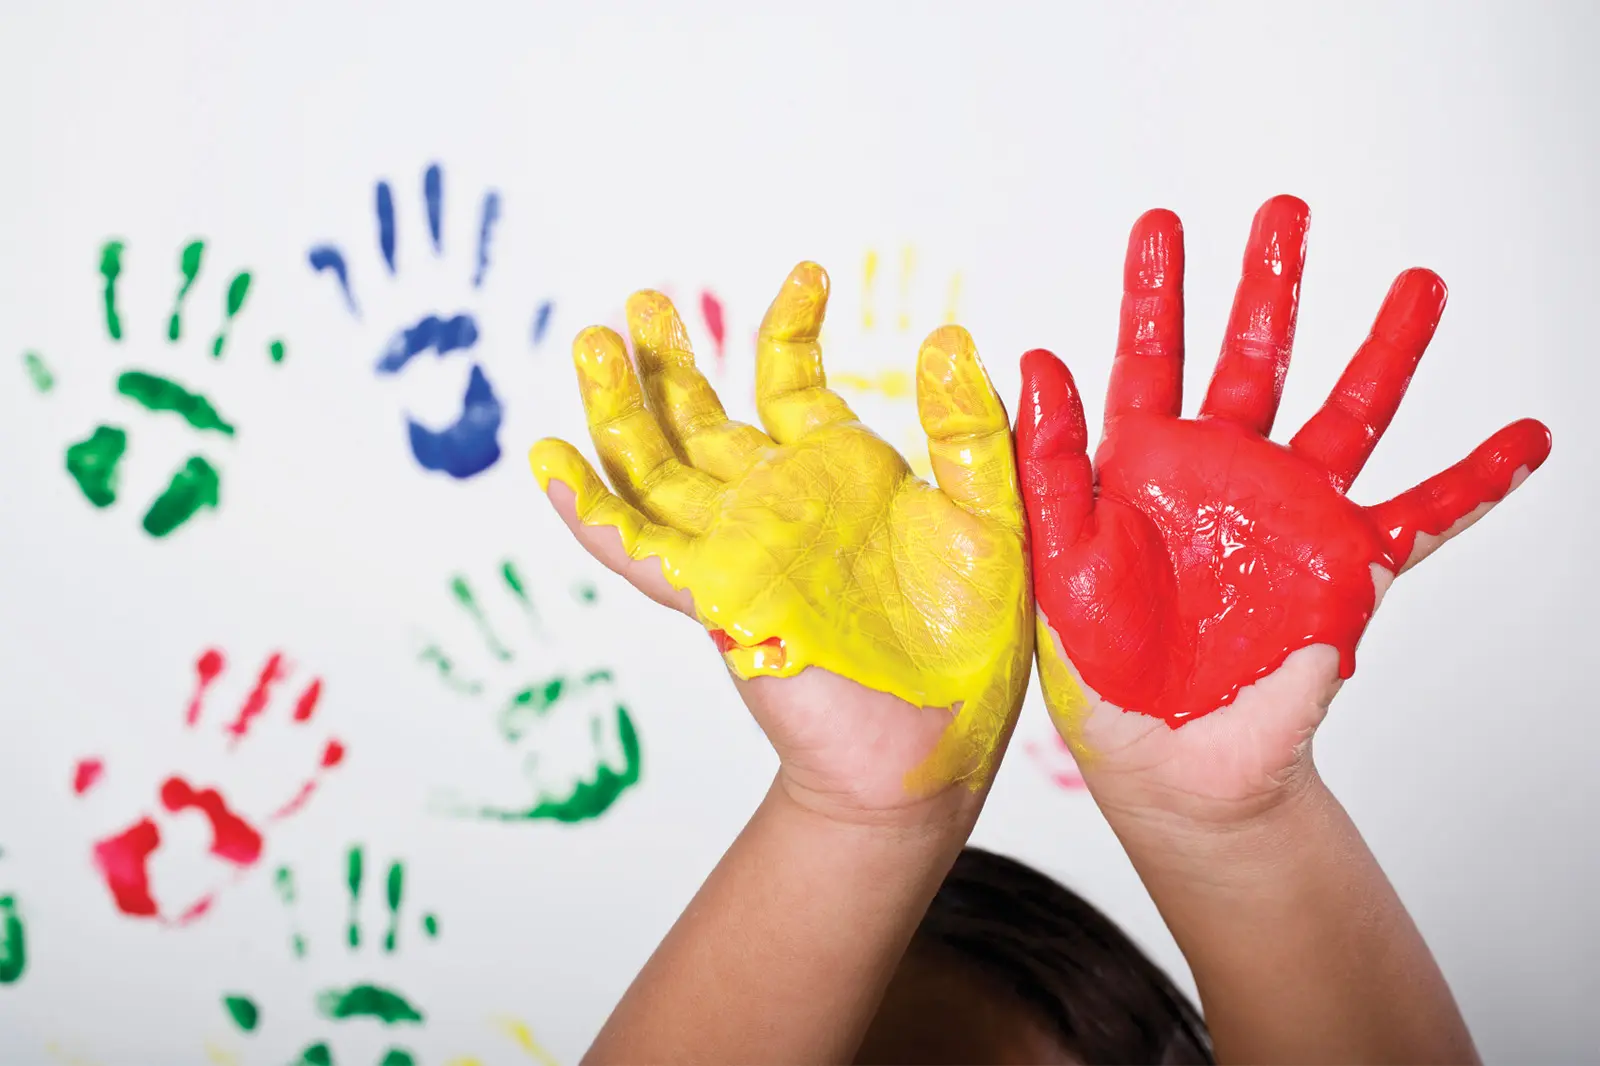 Hands of child covered in paint in front of white surface with paint handprints